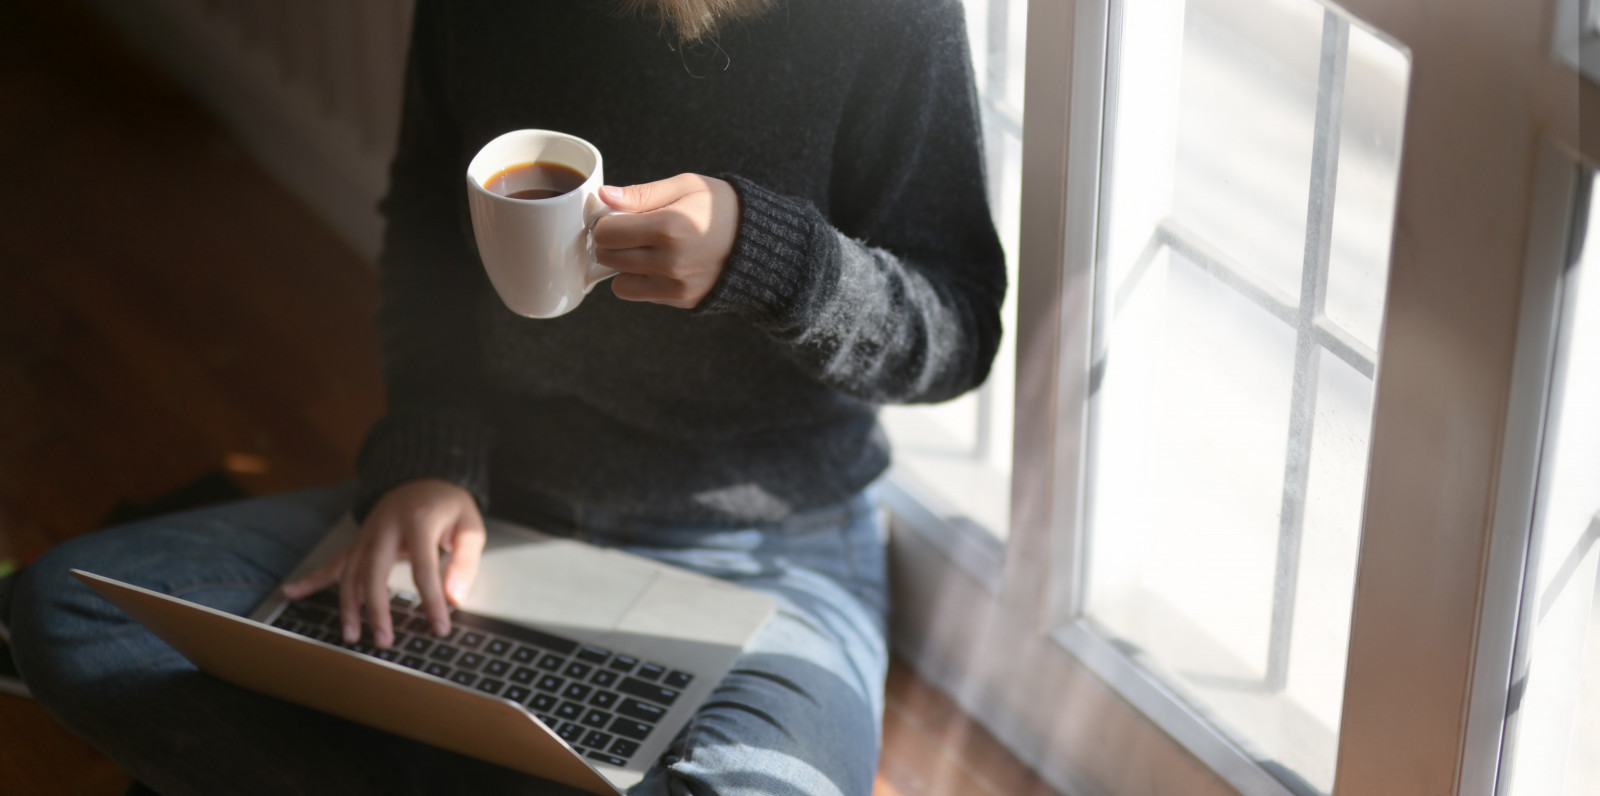 woman using laptop while holding a cup of coffee 3759083